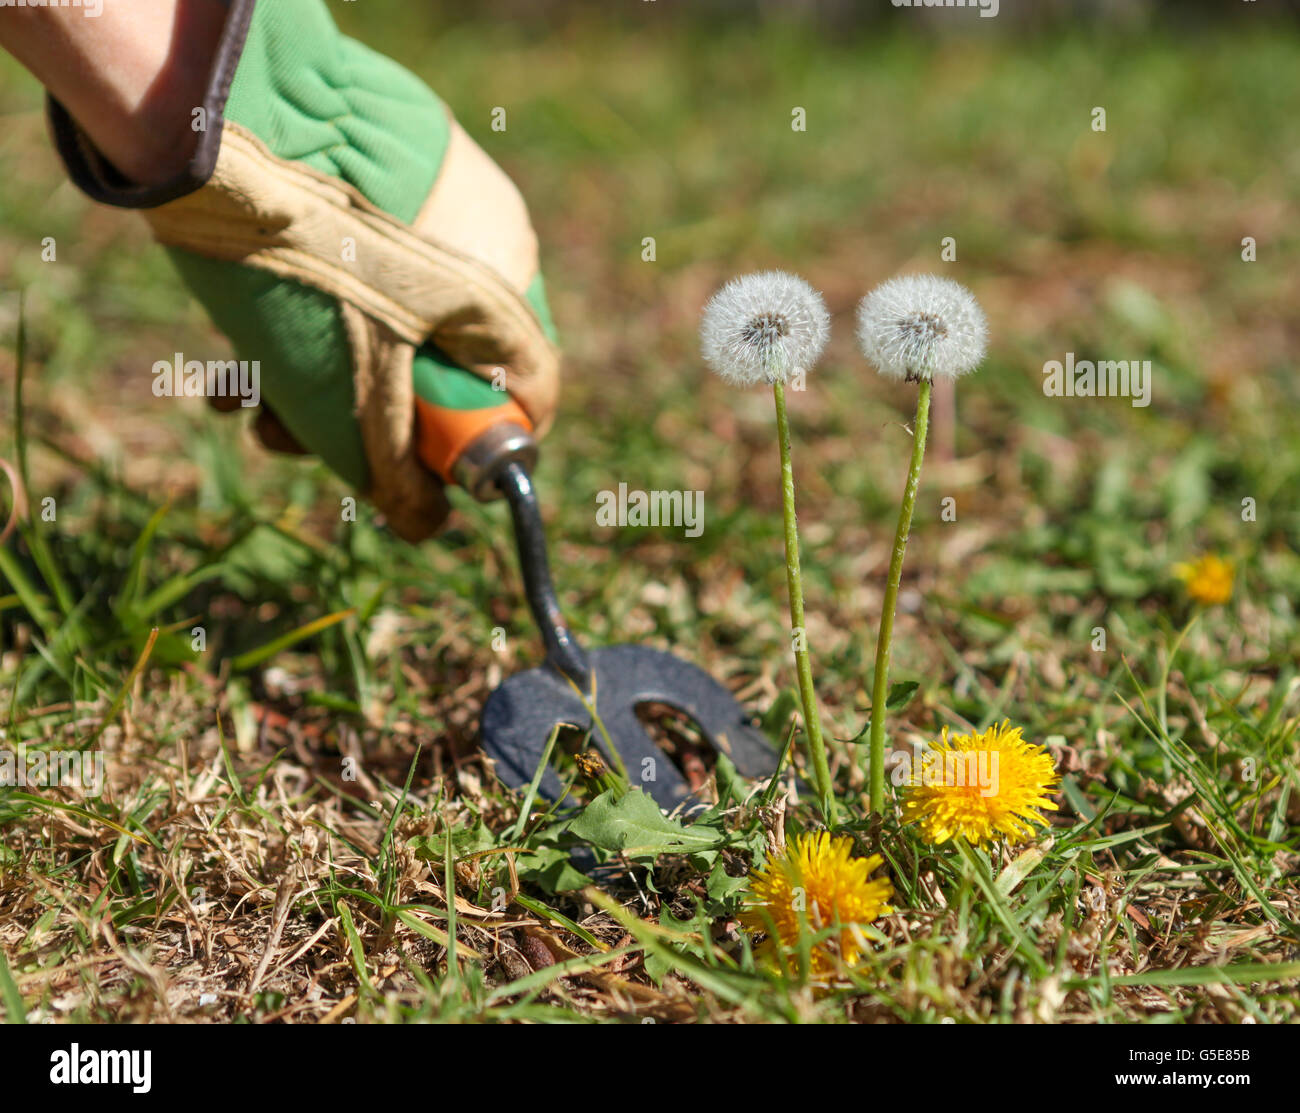 Weeding the lawn and grass. Garden Jobs for a prefect lawn. Stock Photo